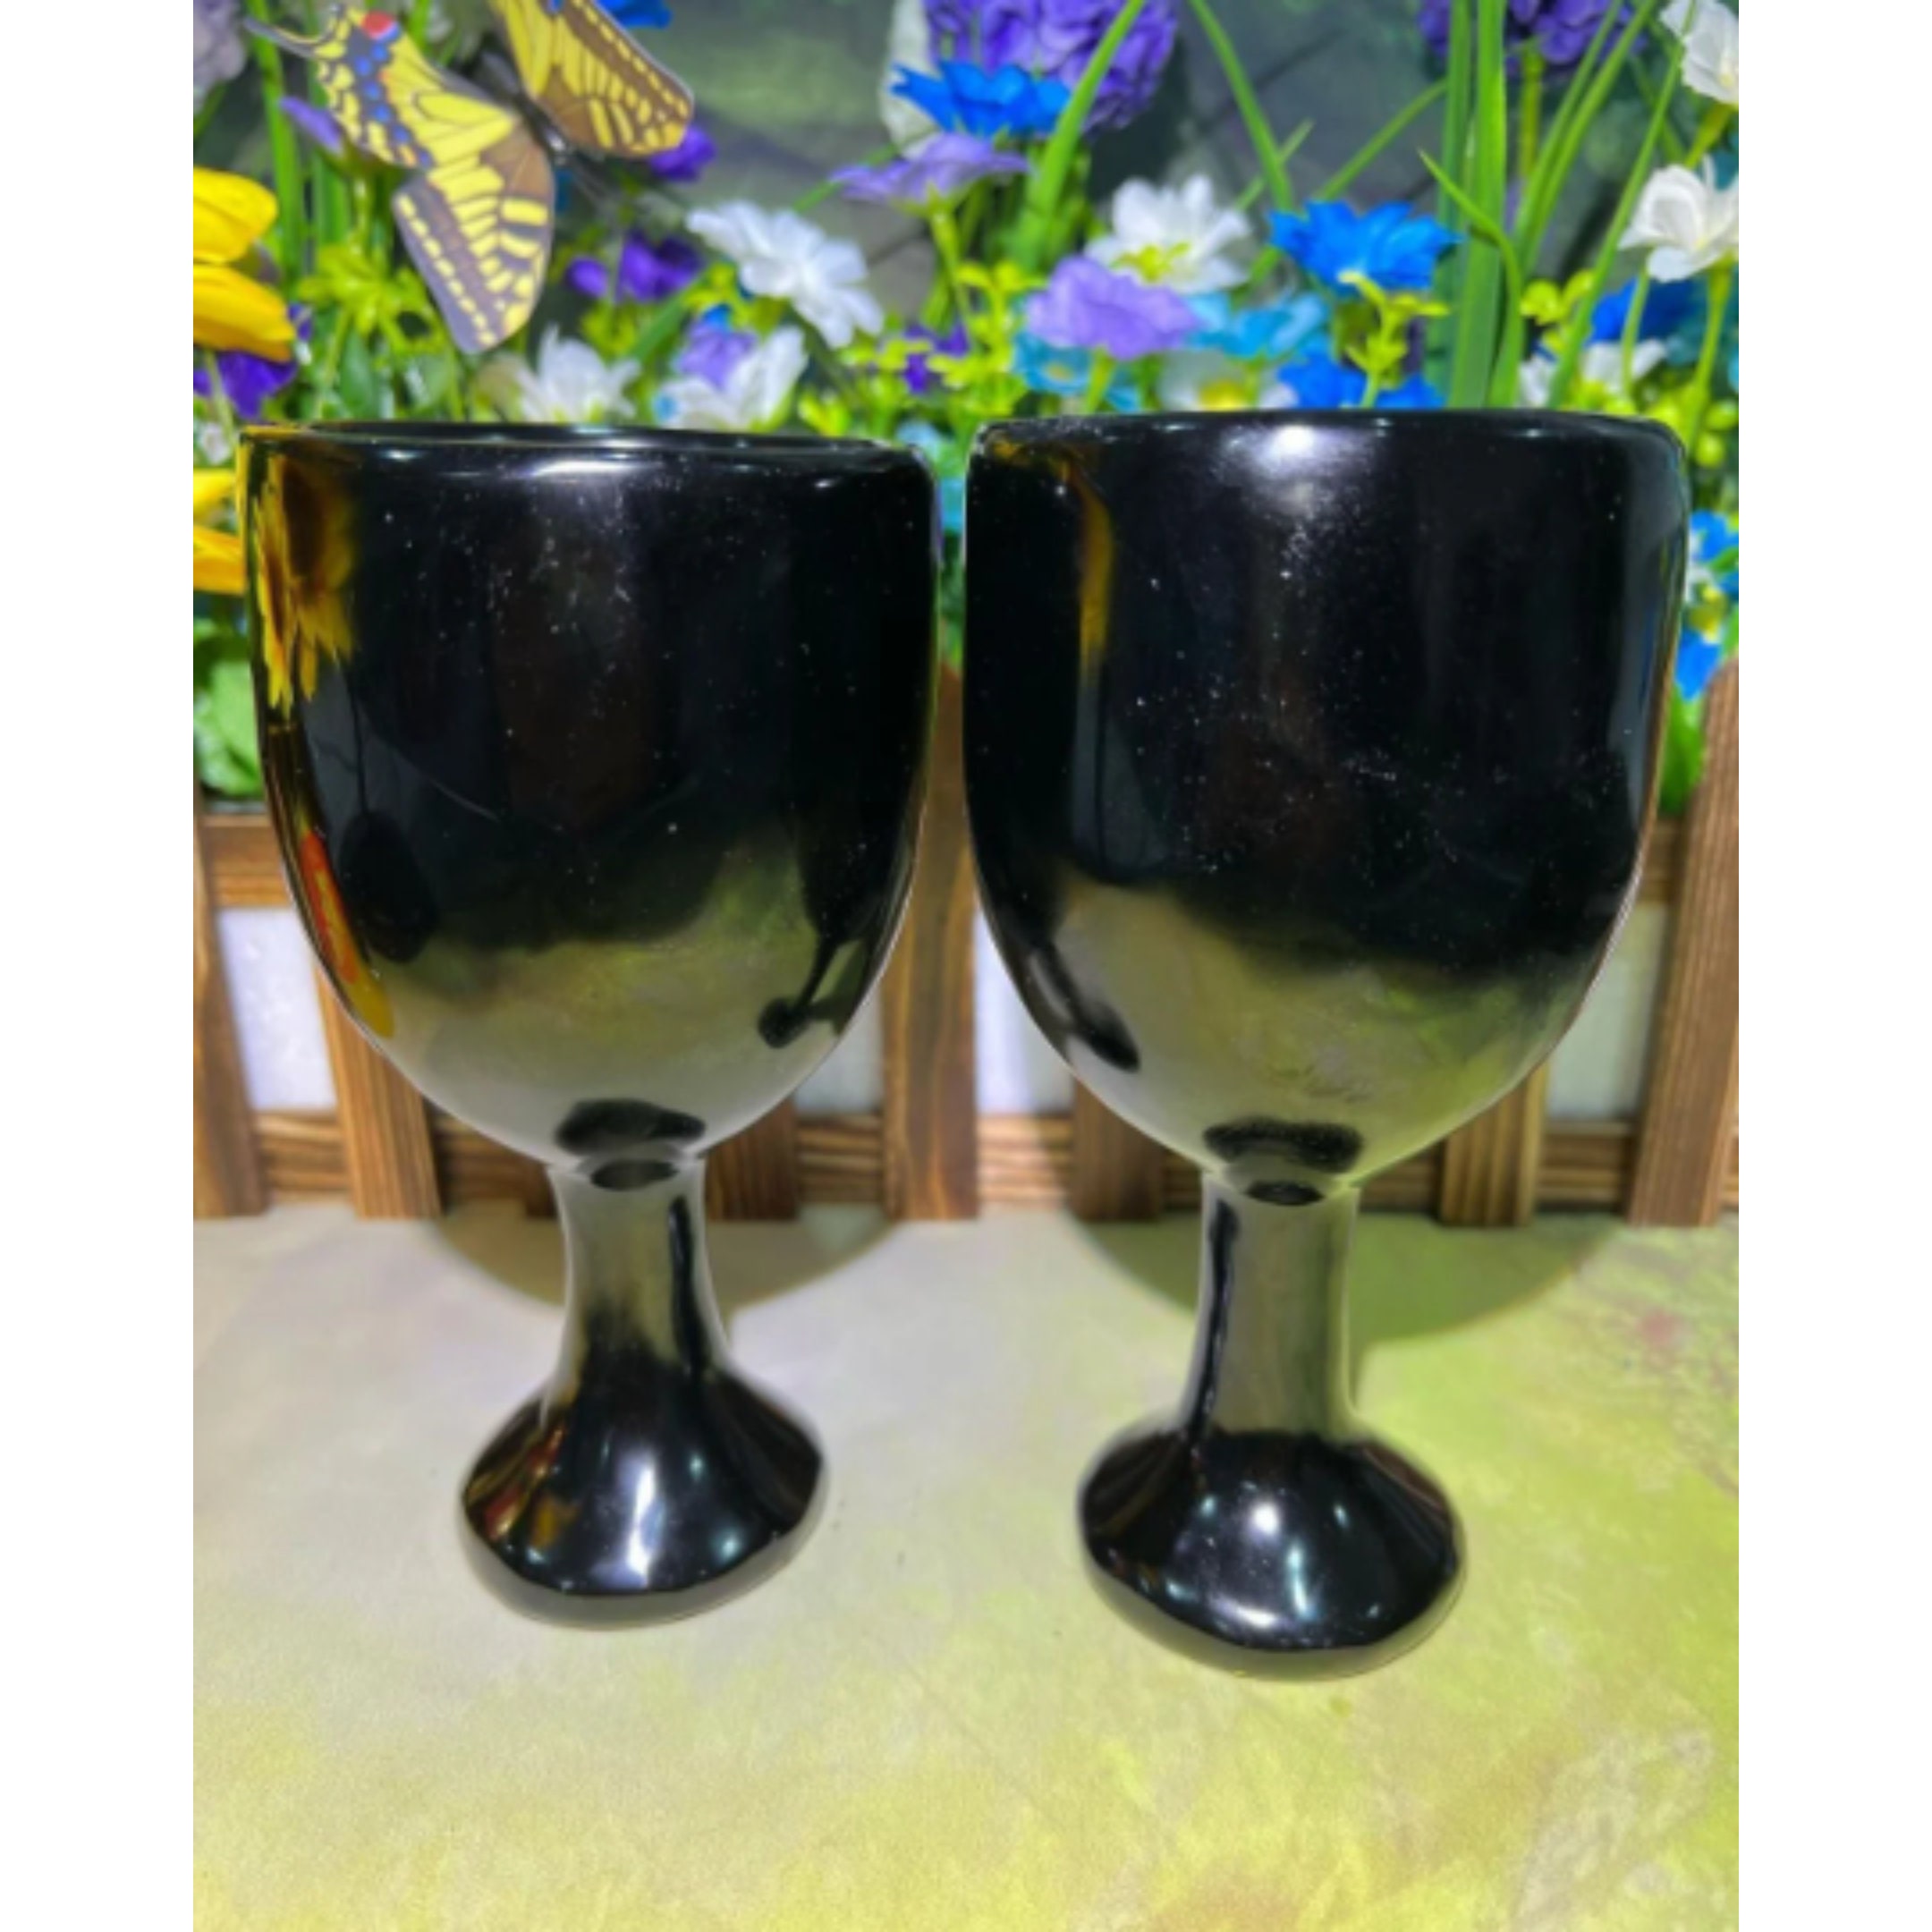 Vintage Blue Stem Wine Glass Set of 4 / Scalloped Water Goblets / Barware /  Water Witch Ritual Chalice / Ocean Witch / Witchy Decor 